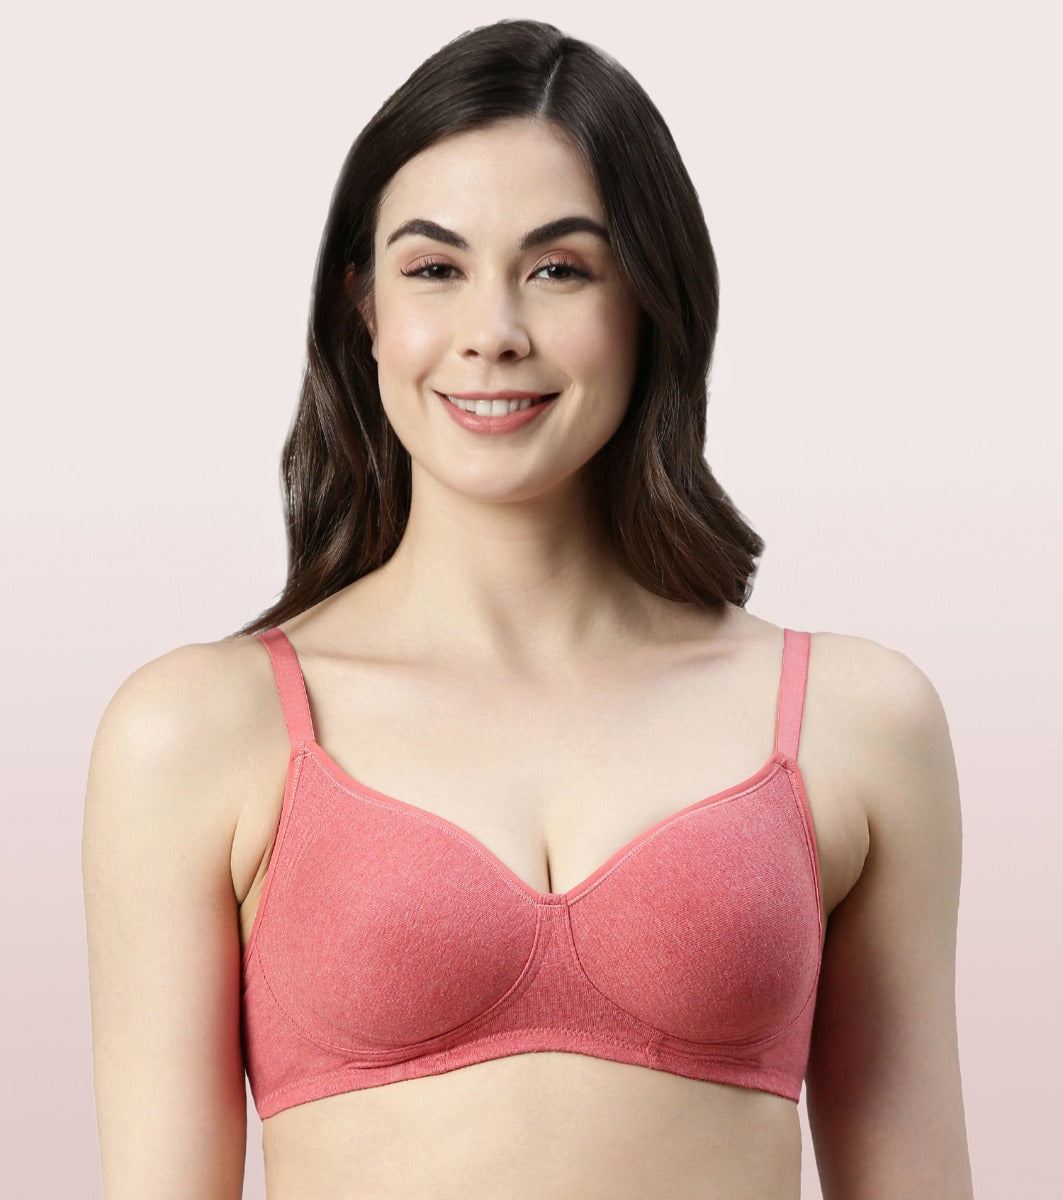 Enamor A003 Butterfly Printed Cotton, Spandex 3/4th Coverage Racerback Bra ( 34B, Green) in Bangalore at best price by Flora For Femme - Justdial